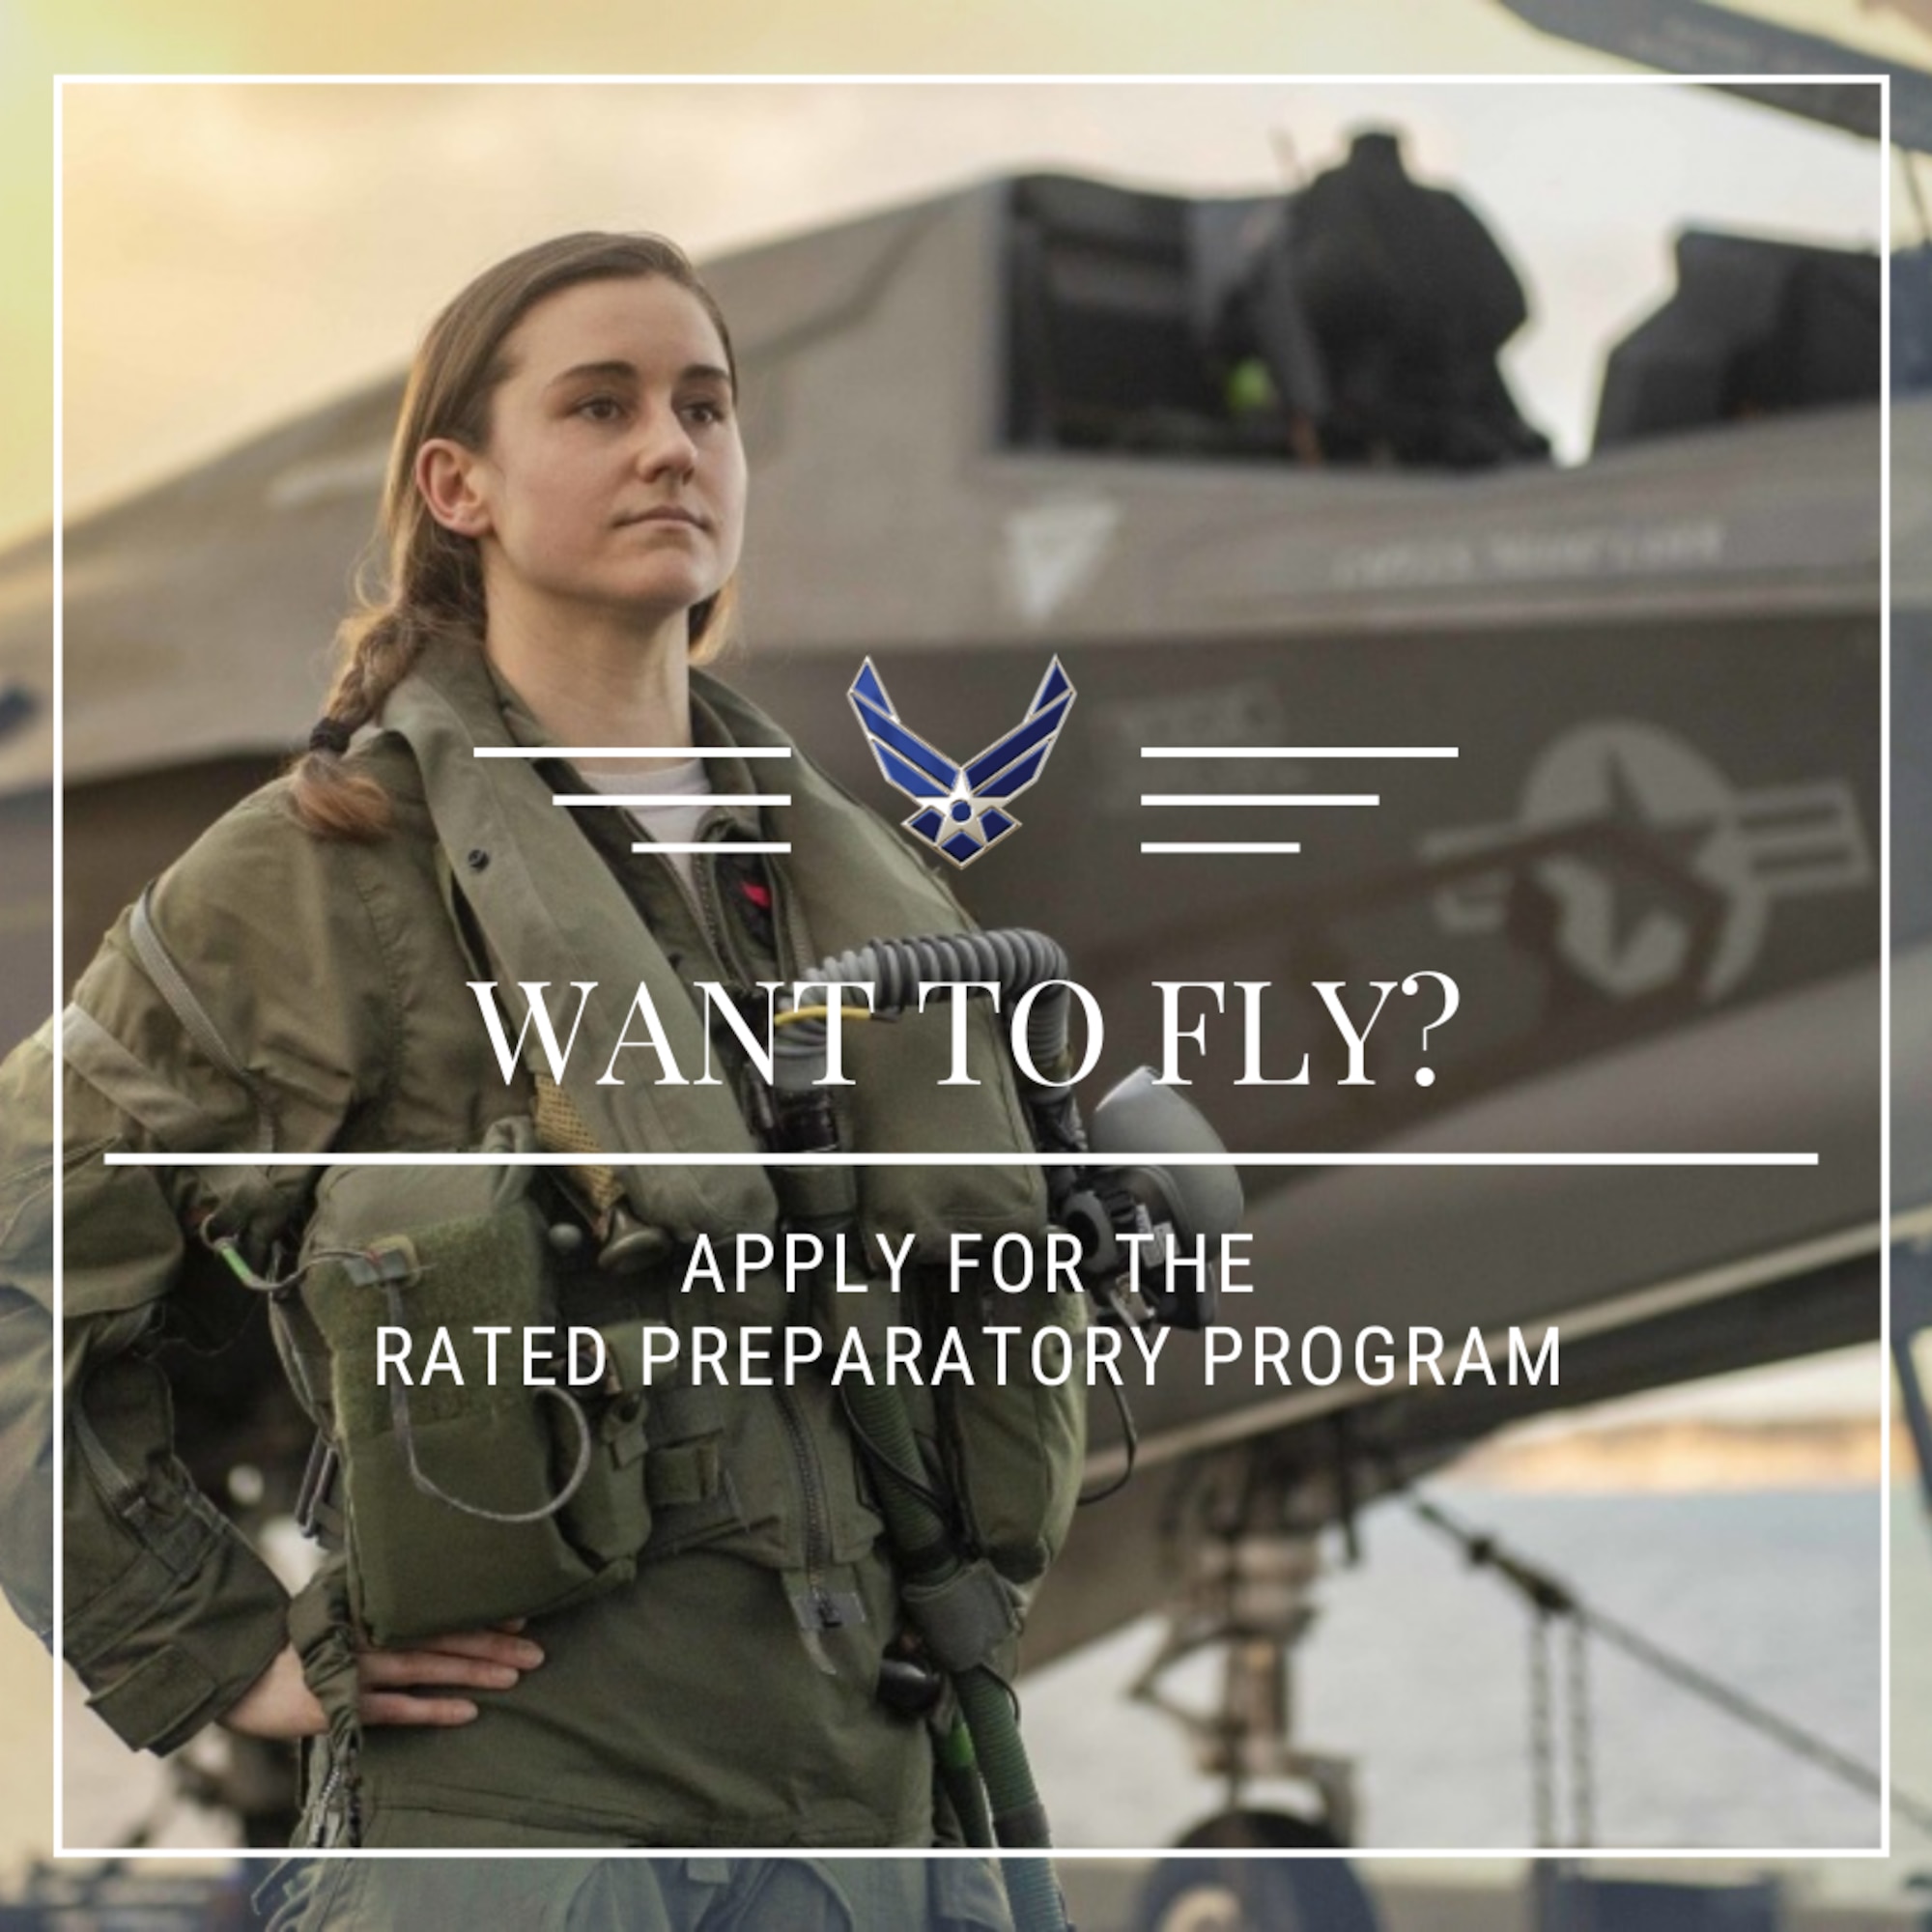 Active duty Air Force officers and enlisted personnel interested in becoming rated officers have until May 25, 2021 to apply for the Fall 2021 Rated Preparatory Program that is schedule to be held Sept. 11-25, 2020.